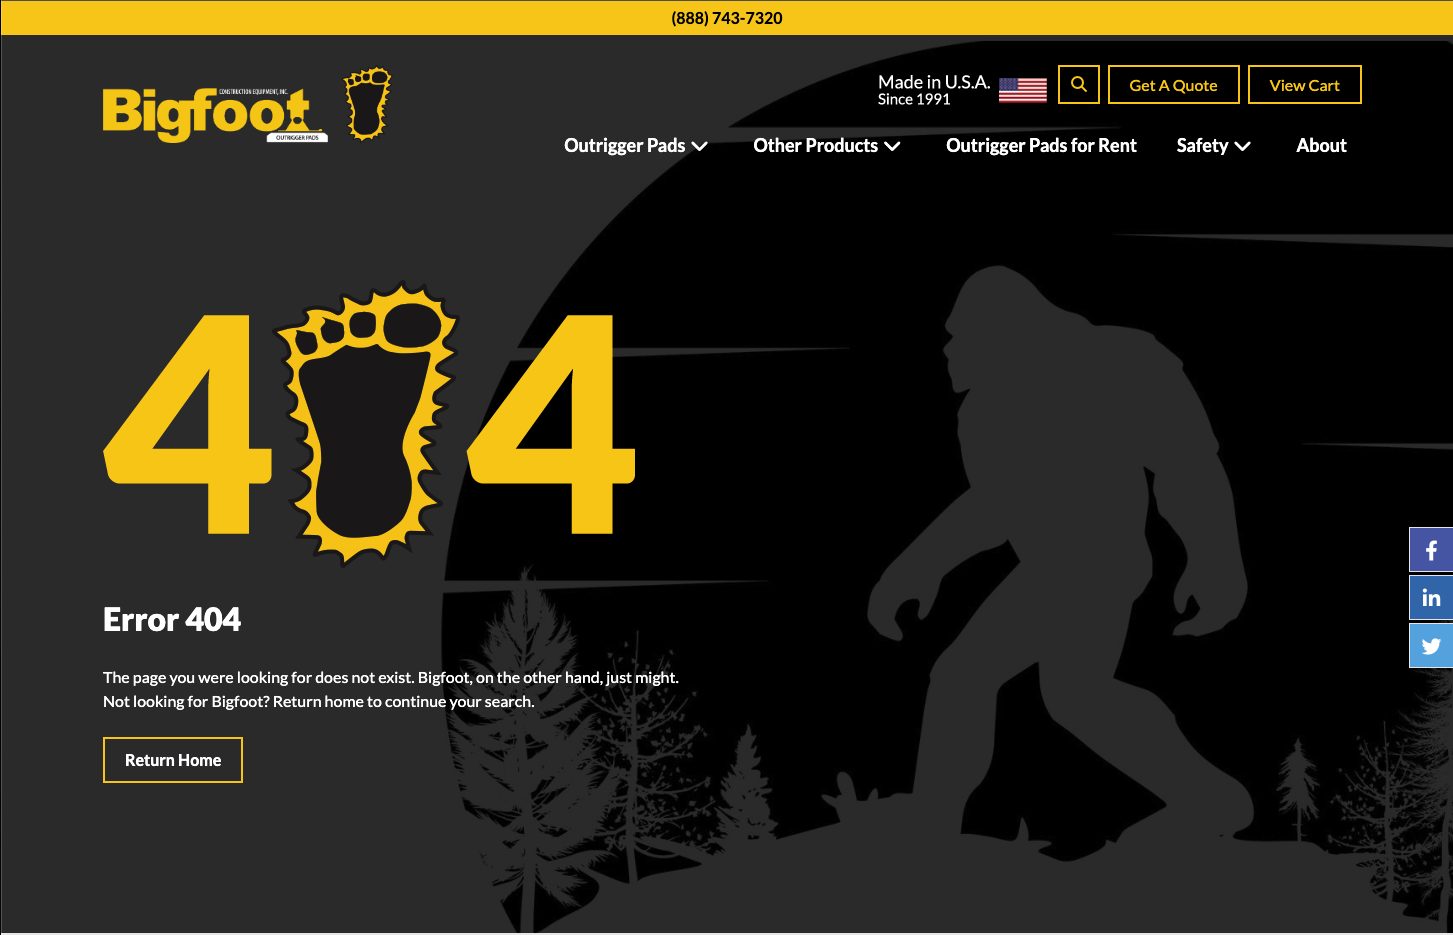 Bigfoot Outrigger Page has one of our favorite 404 page designs with a play on words Bigfoot in the background and their logo used for the 404 on page.